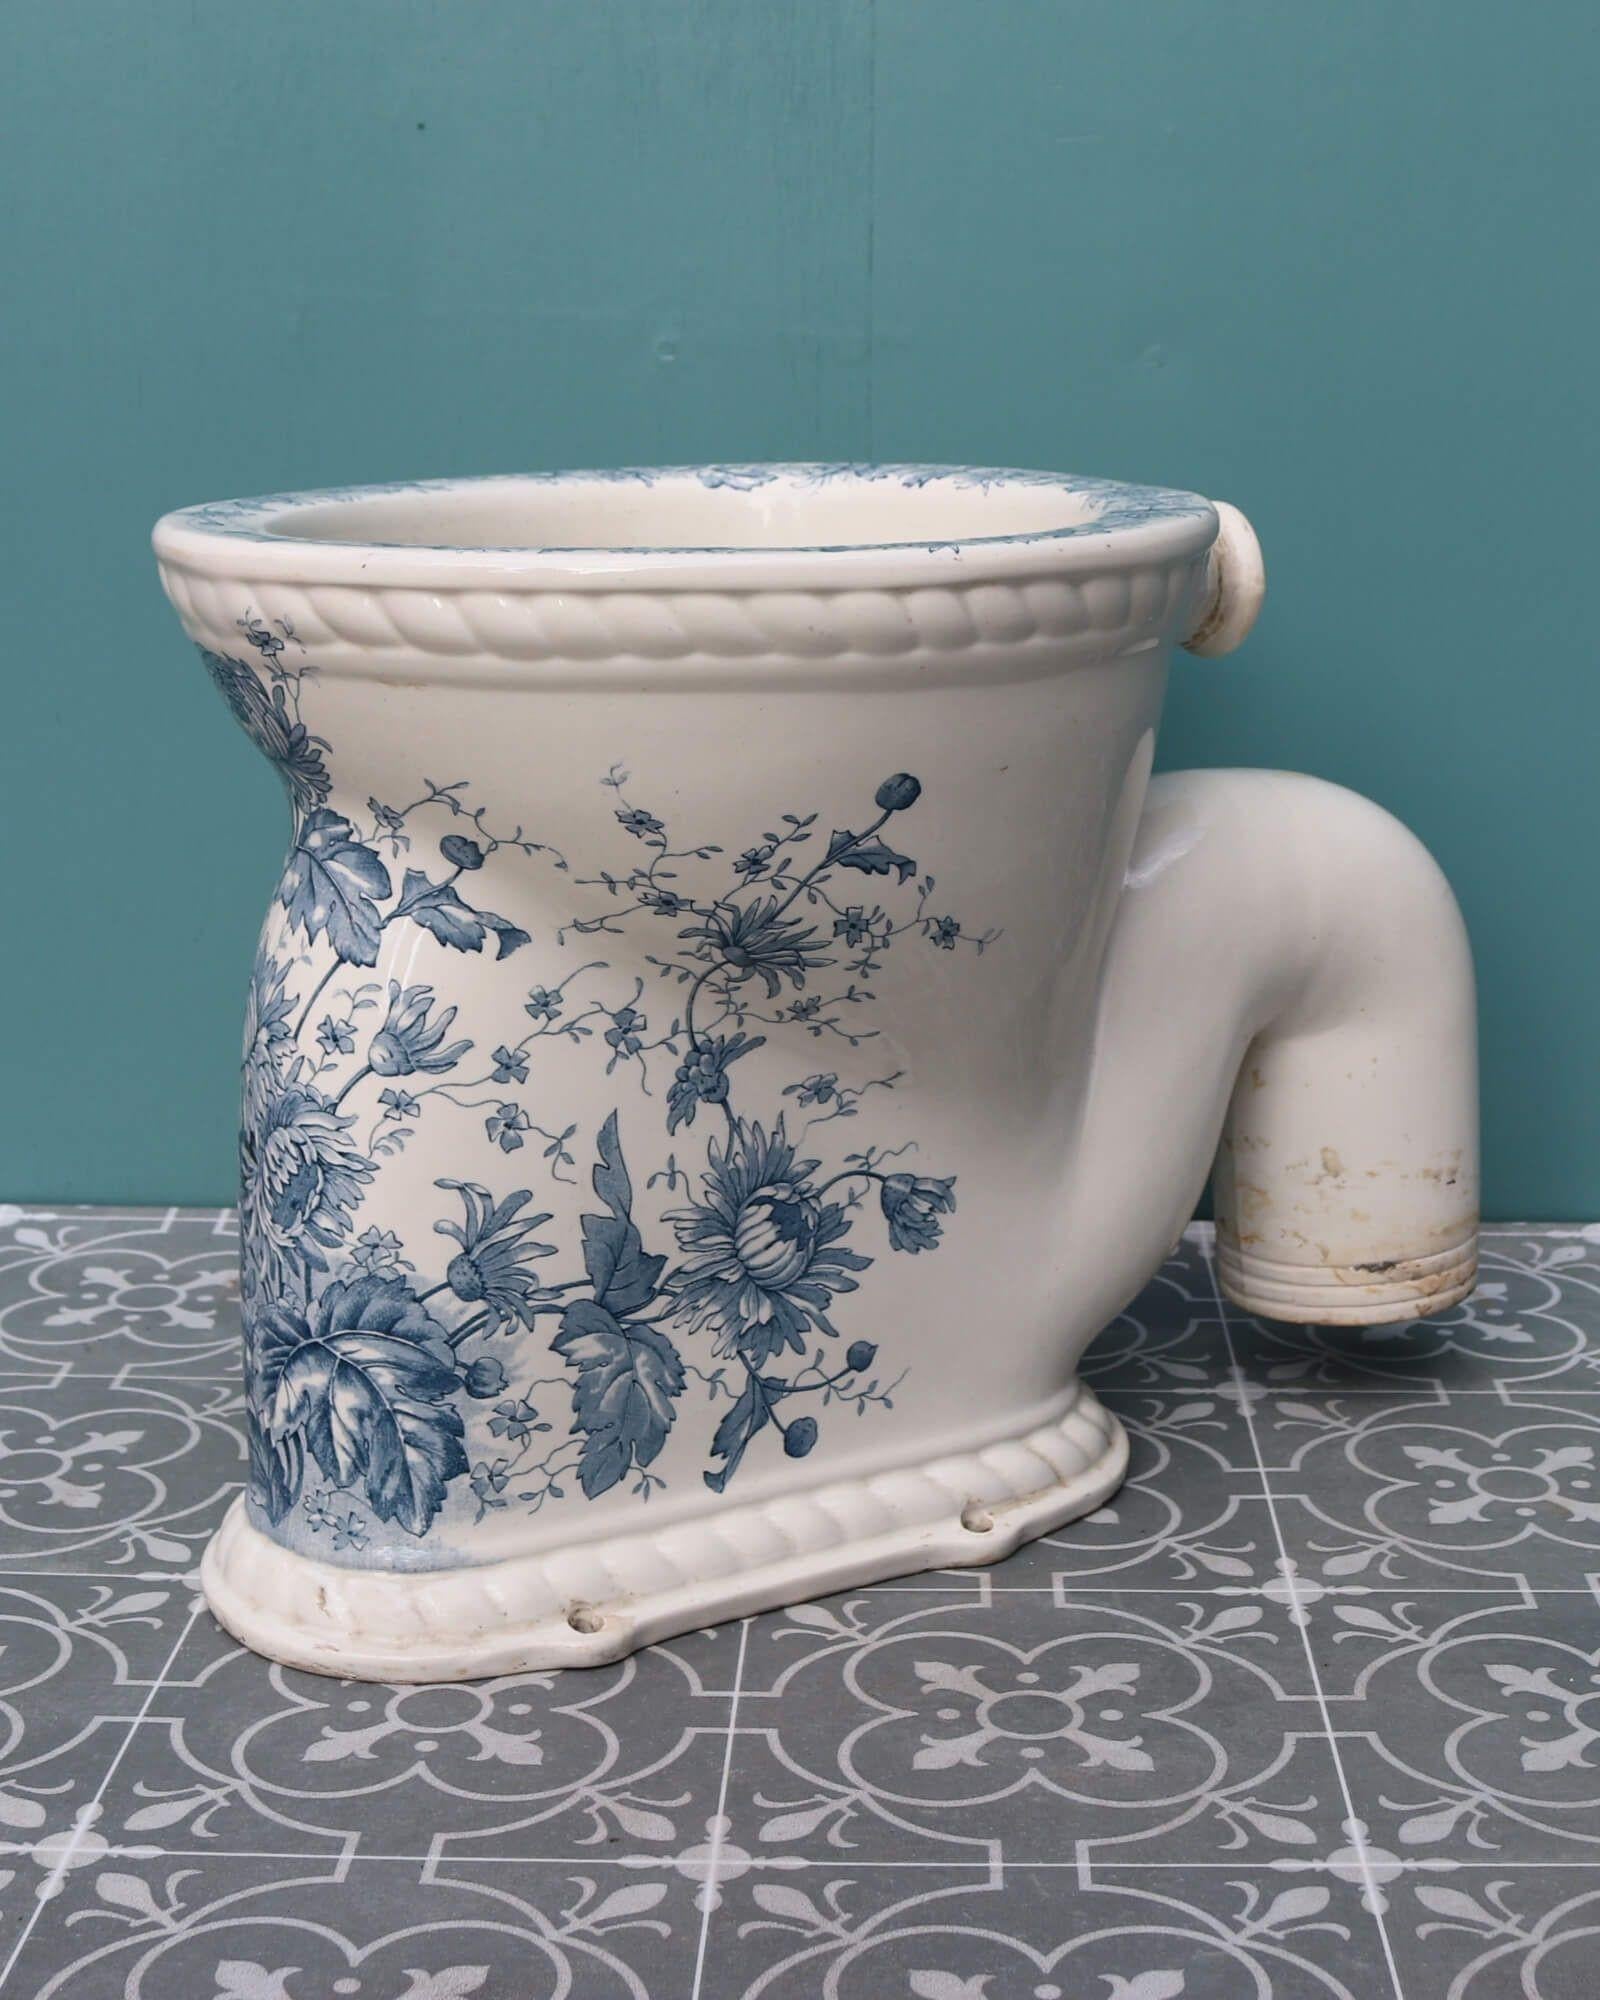 19th Century Antique Victorian Patterned Waterfall Toilet with S Trap